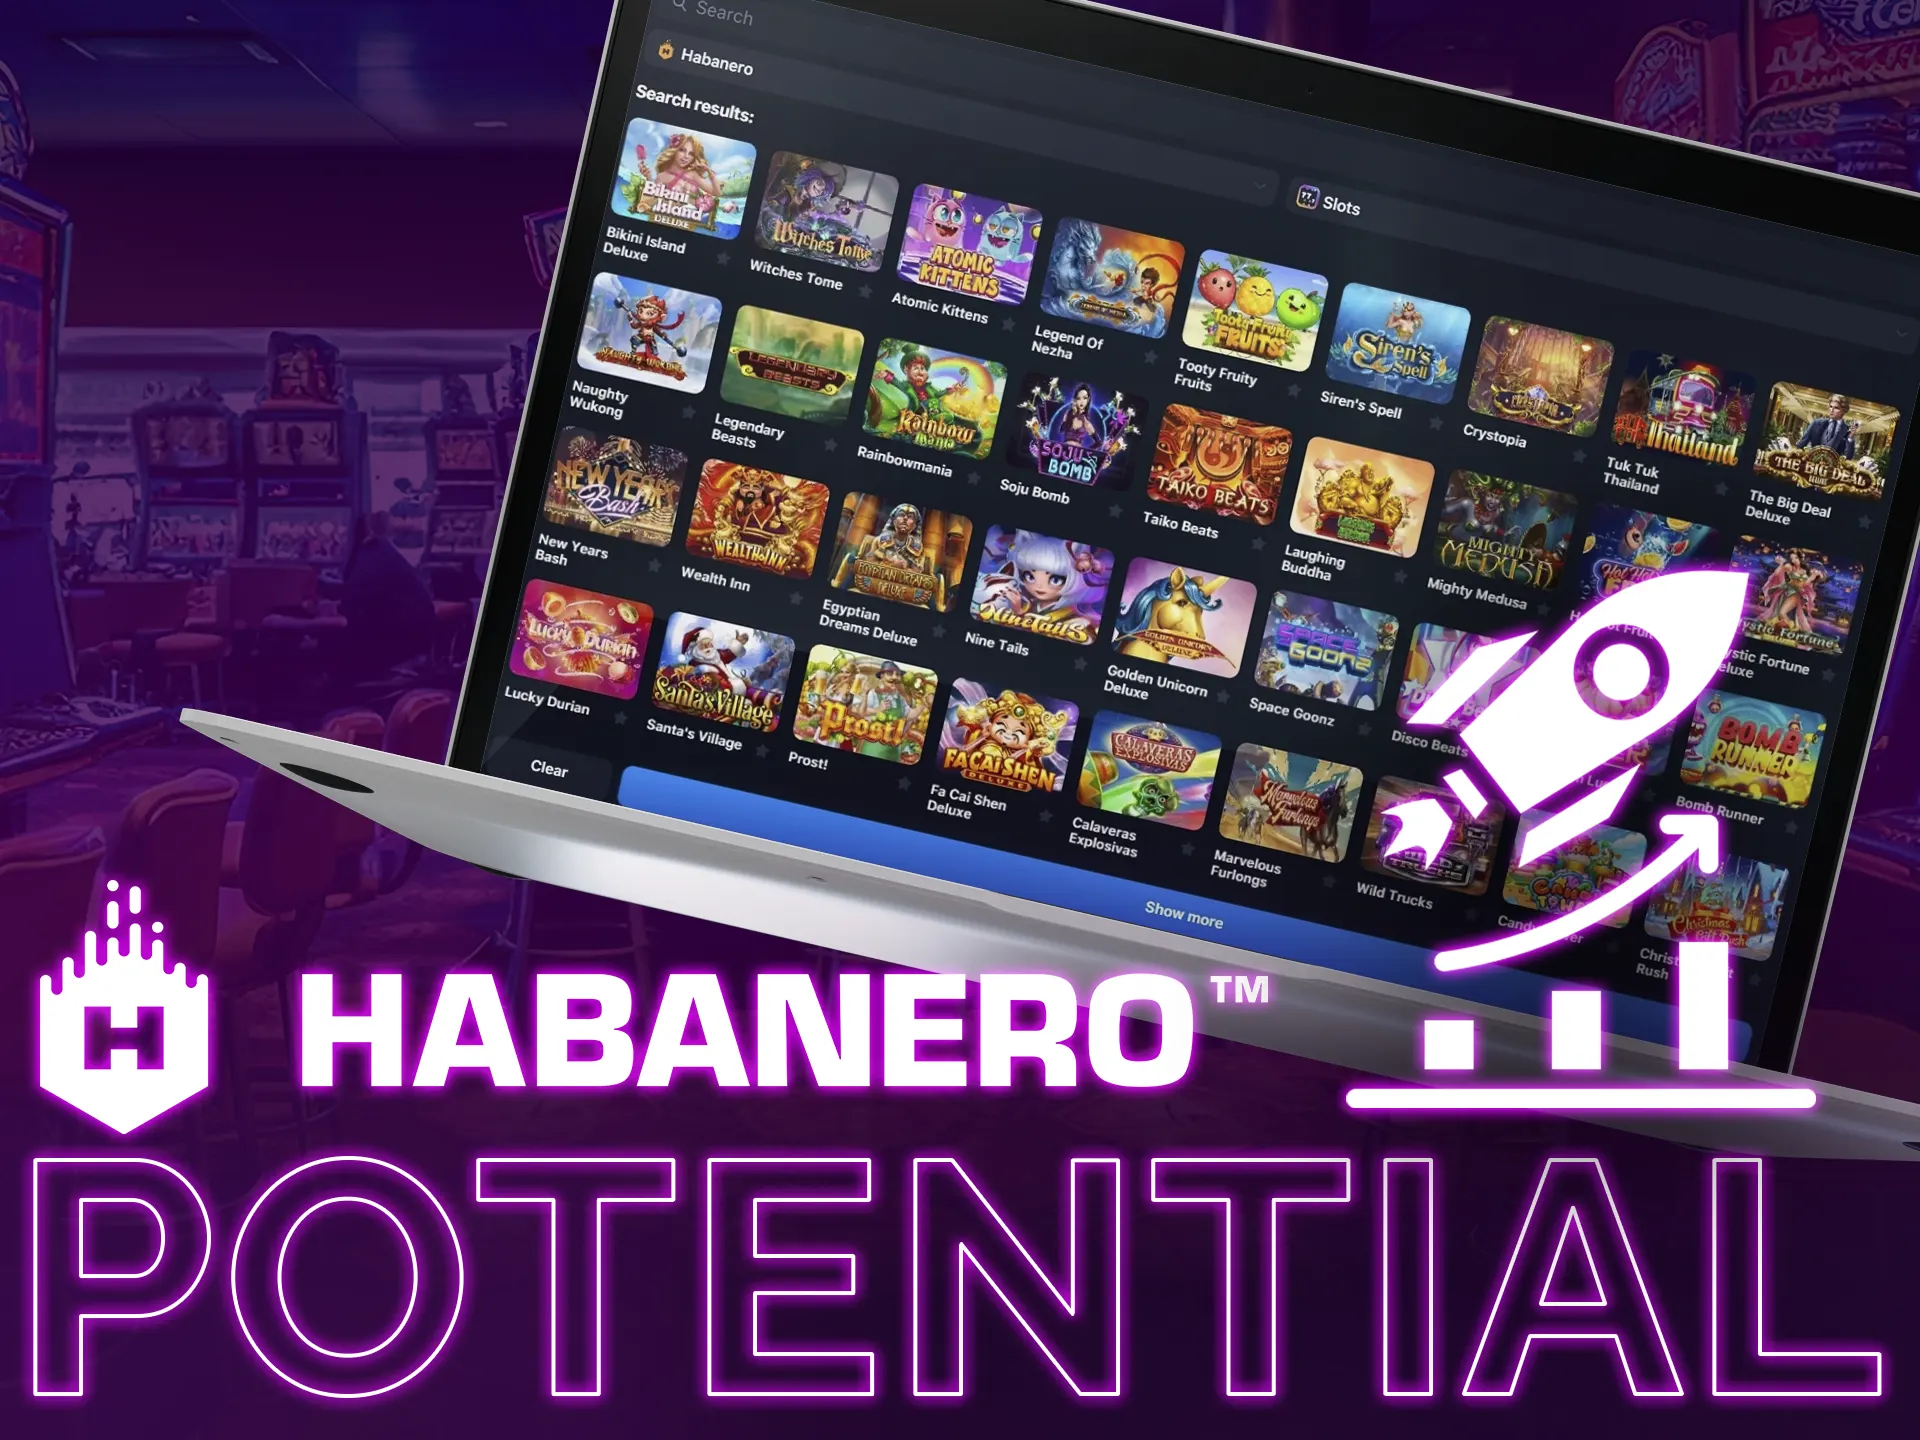 Habanero has high potential for big wins, user-focused provider.